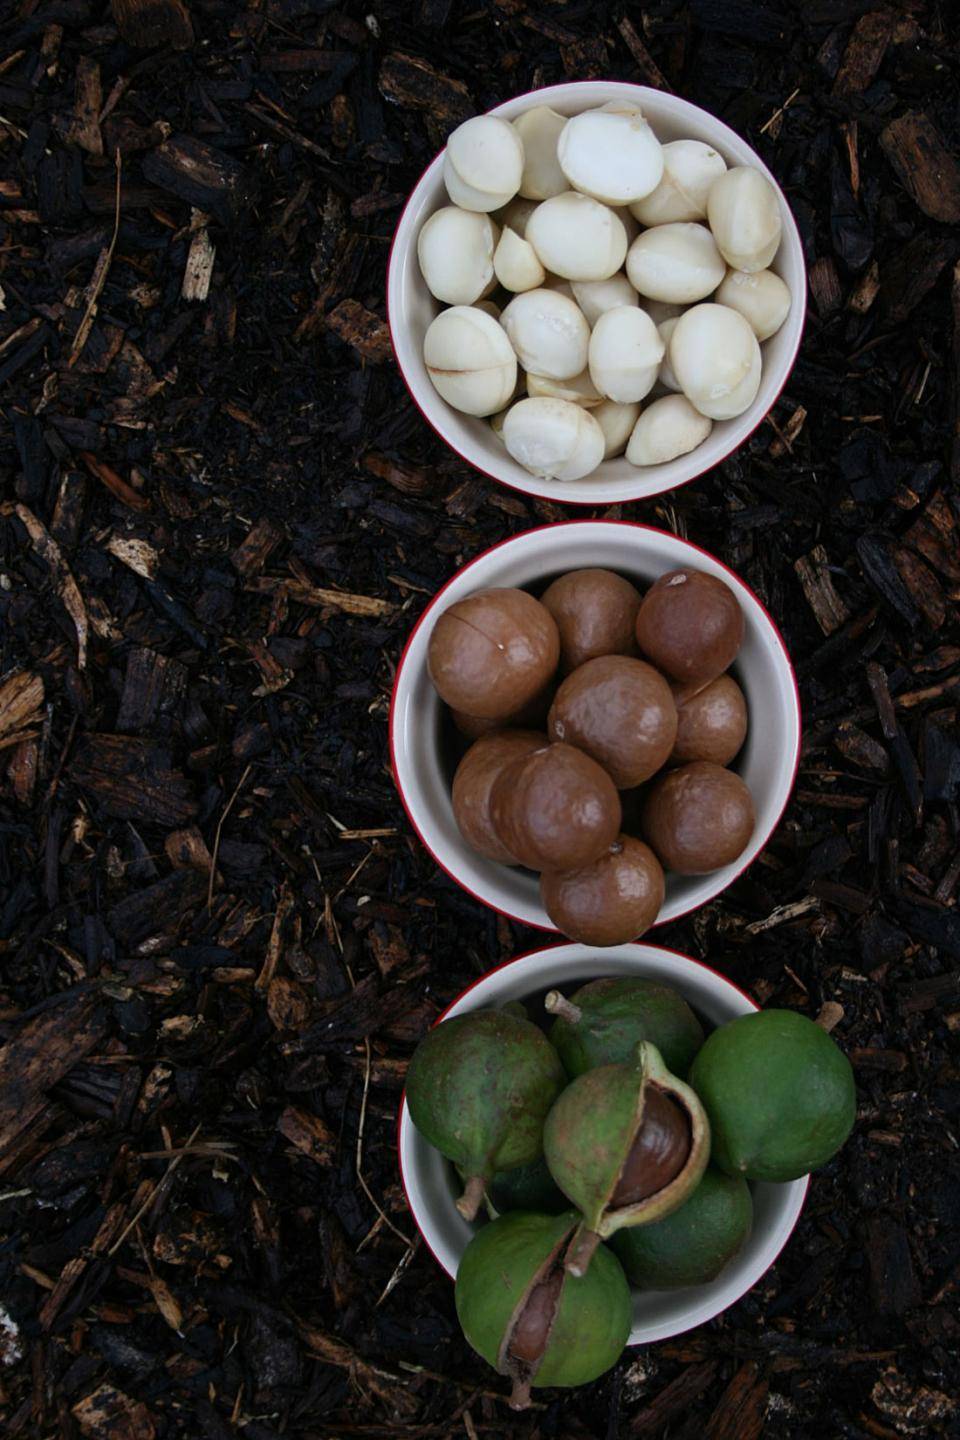 Macadamia nuts with their shells and husk